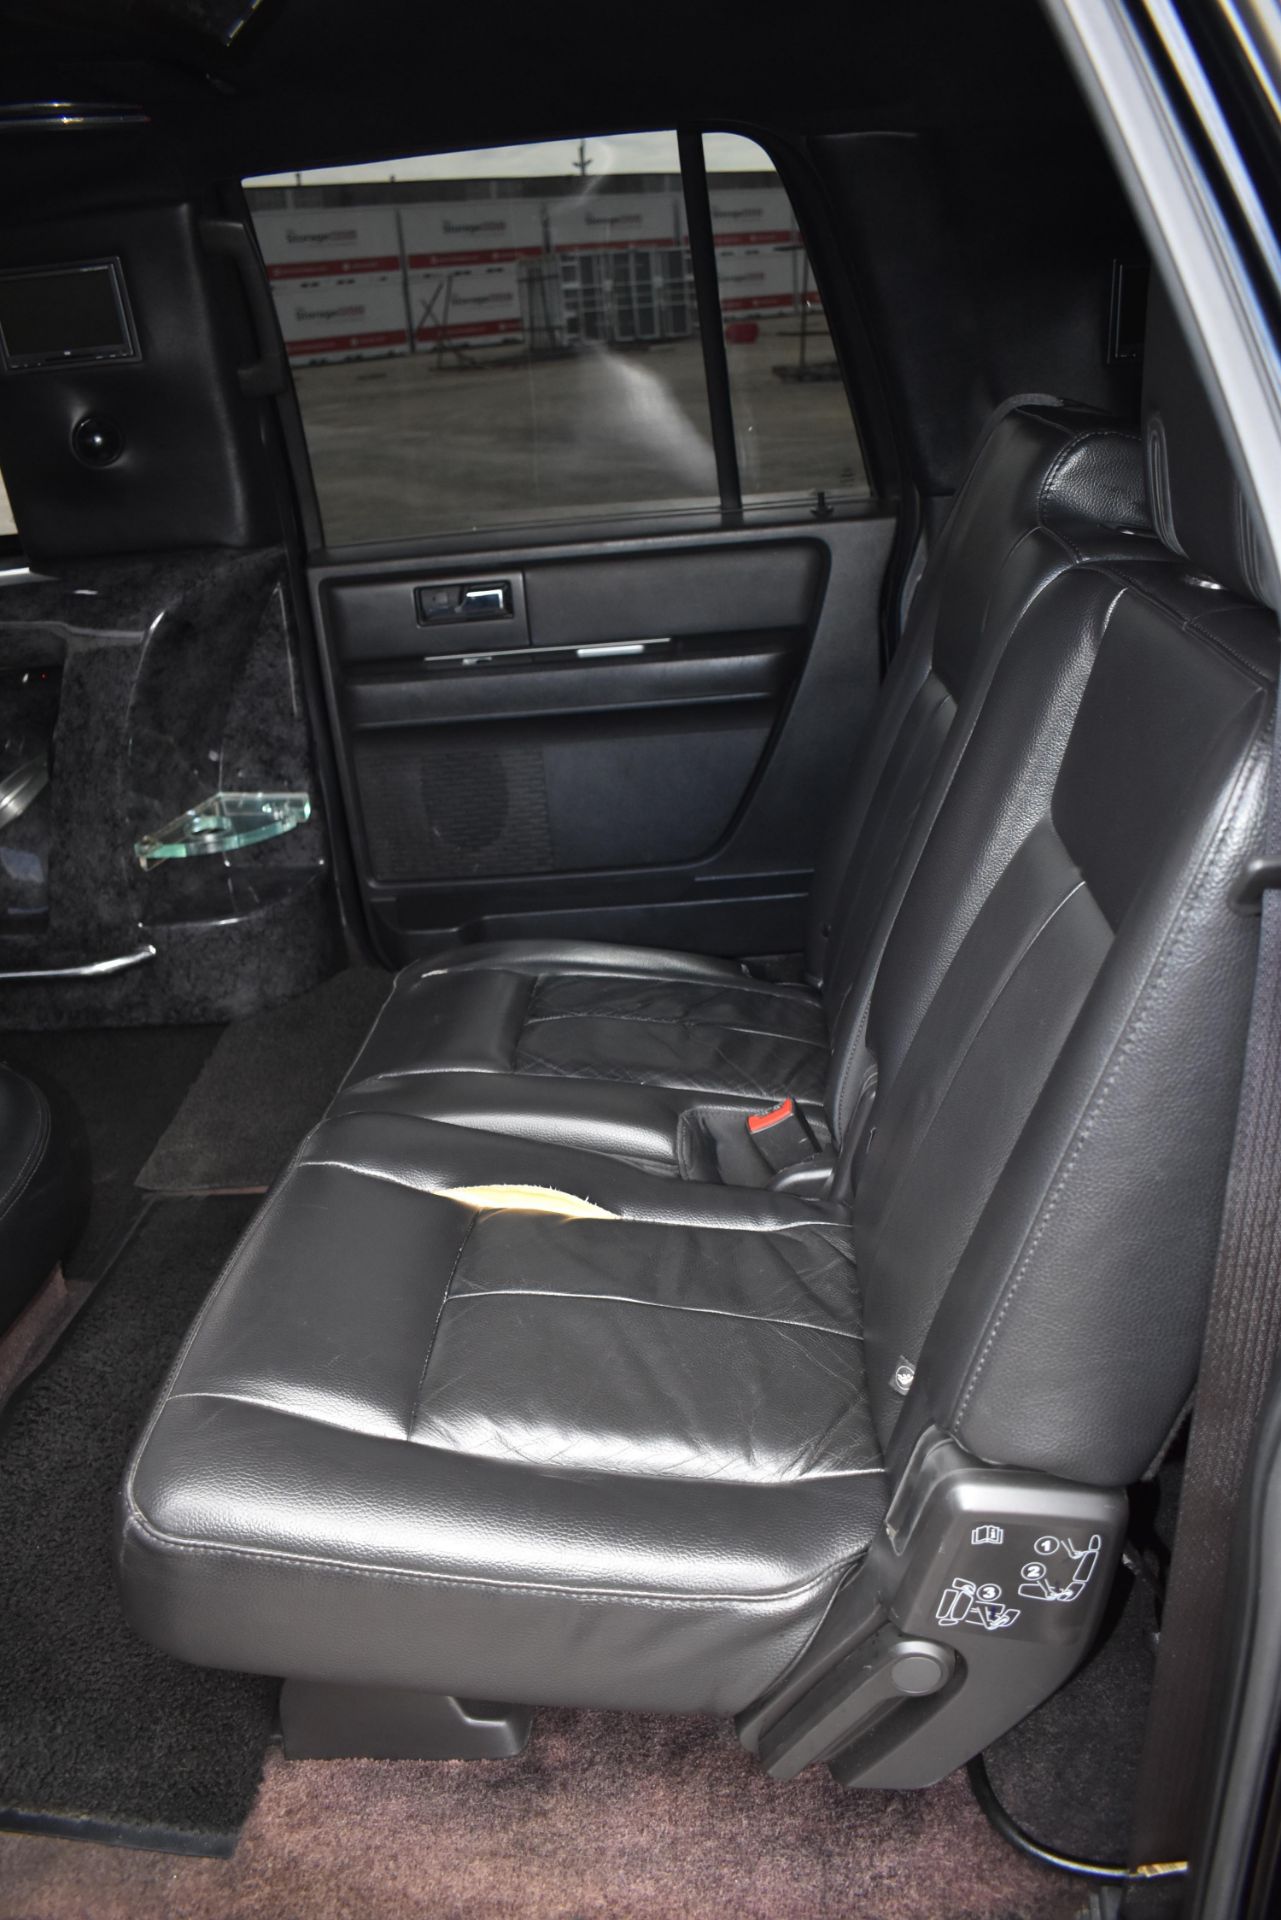 FORD (2008) EXPEDITION 14 PASSENGER STRETCH LIMOUSINE WITH 8 CYLINDER 5.4L GAS ENGINE, 177,845KM ( - Image 18 of 26